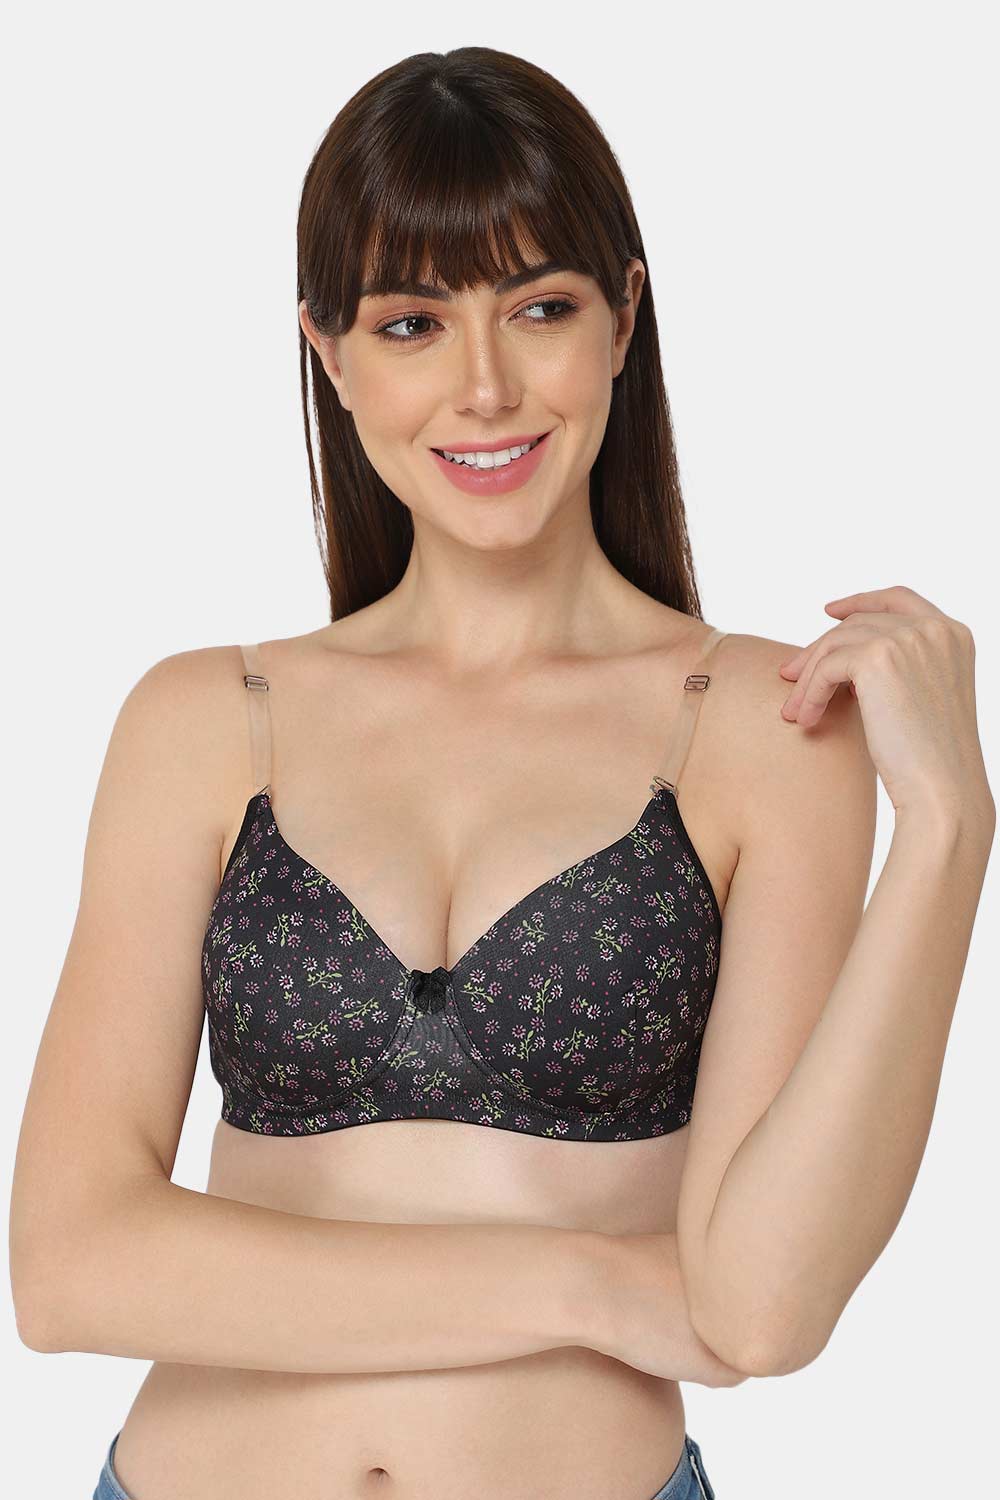 Clovia Padded Non-Wired Full Cup Halter Neck Bralette in Black - Lace (36E)